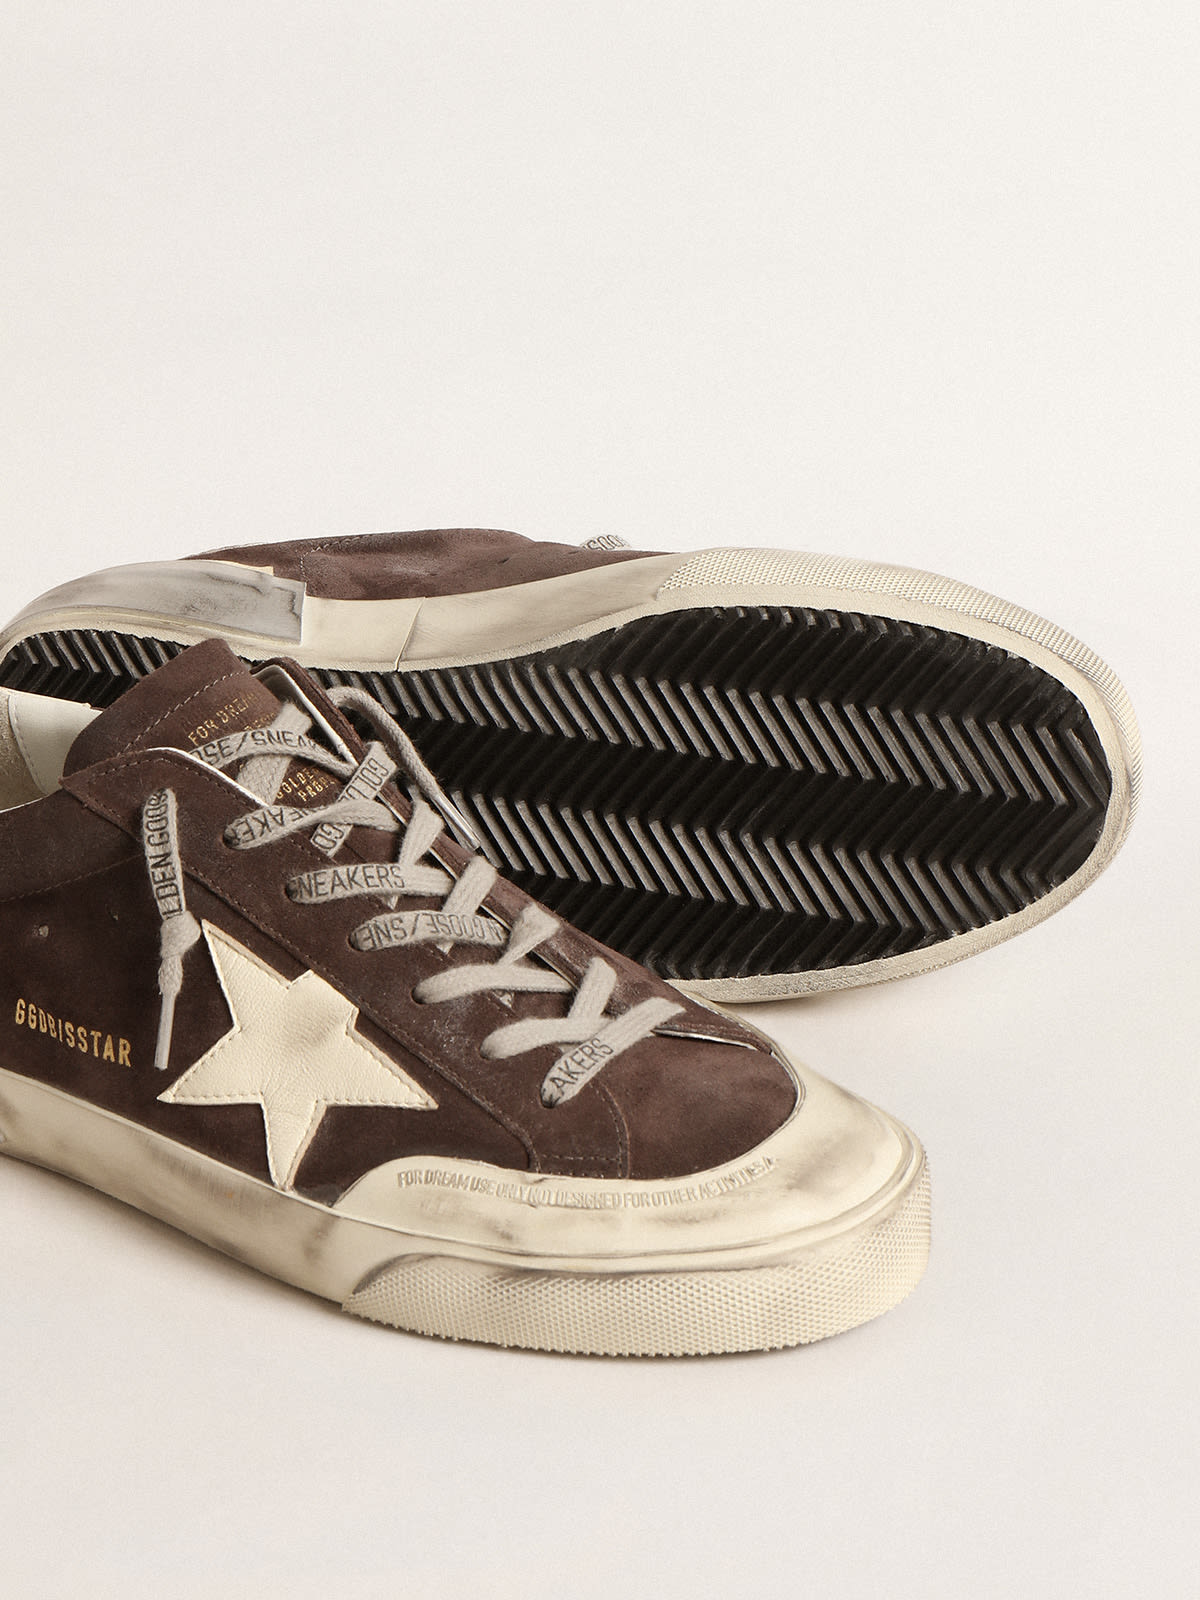 Golden Goose - Super-Star in gray suede with ecru nappa star and heel tab in 